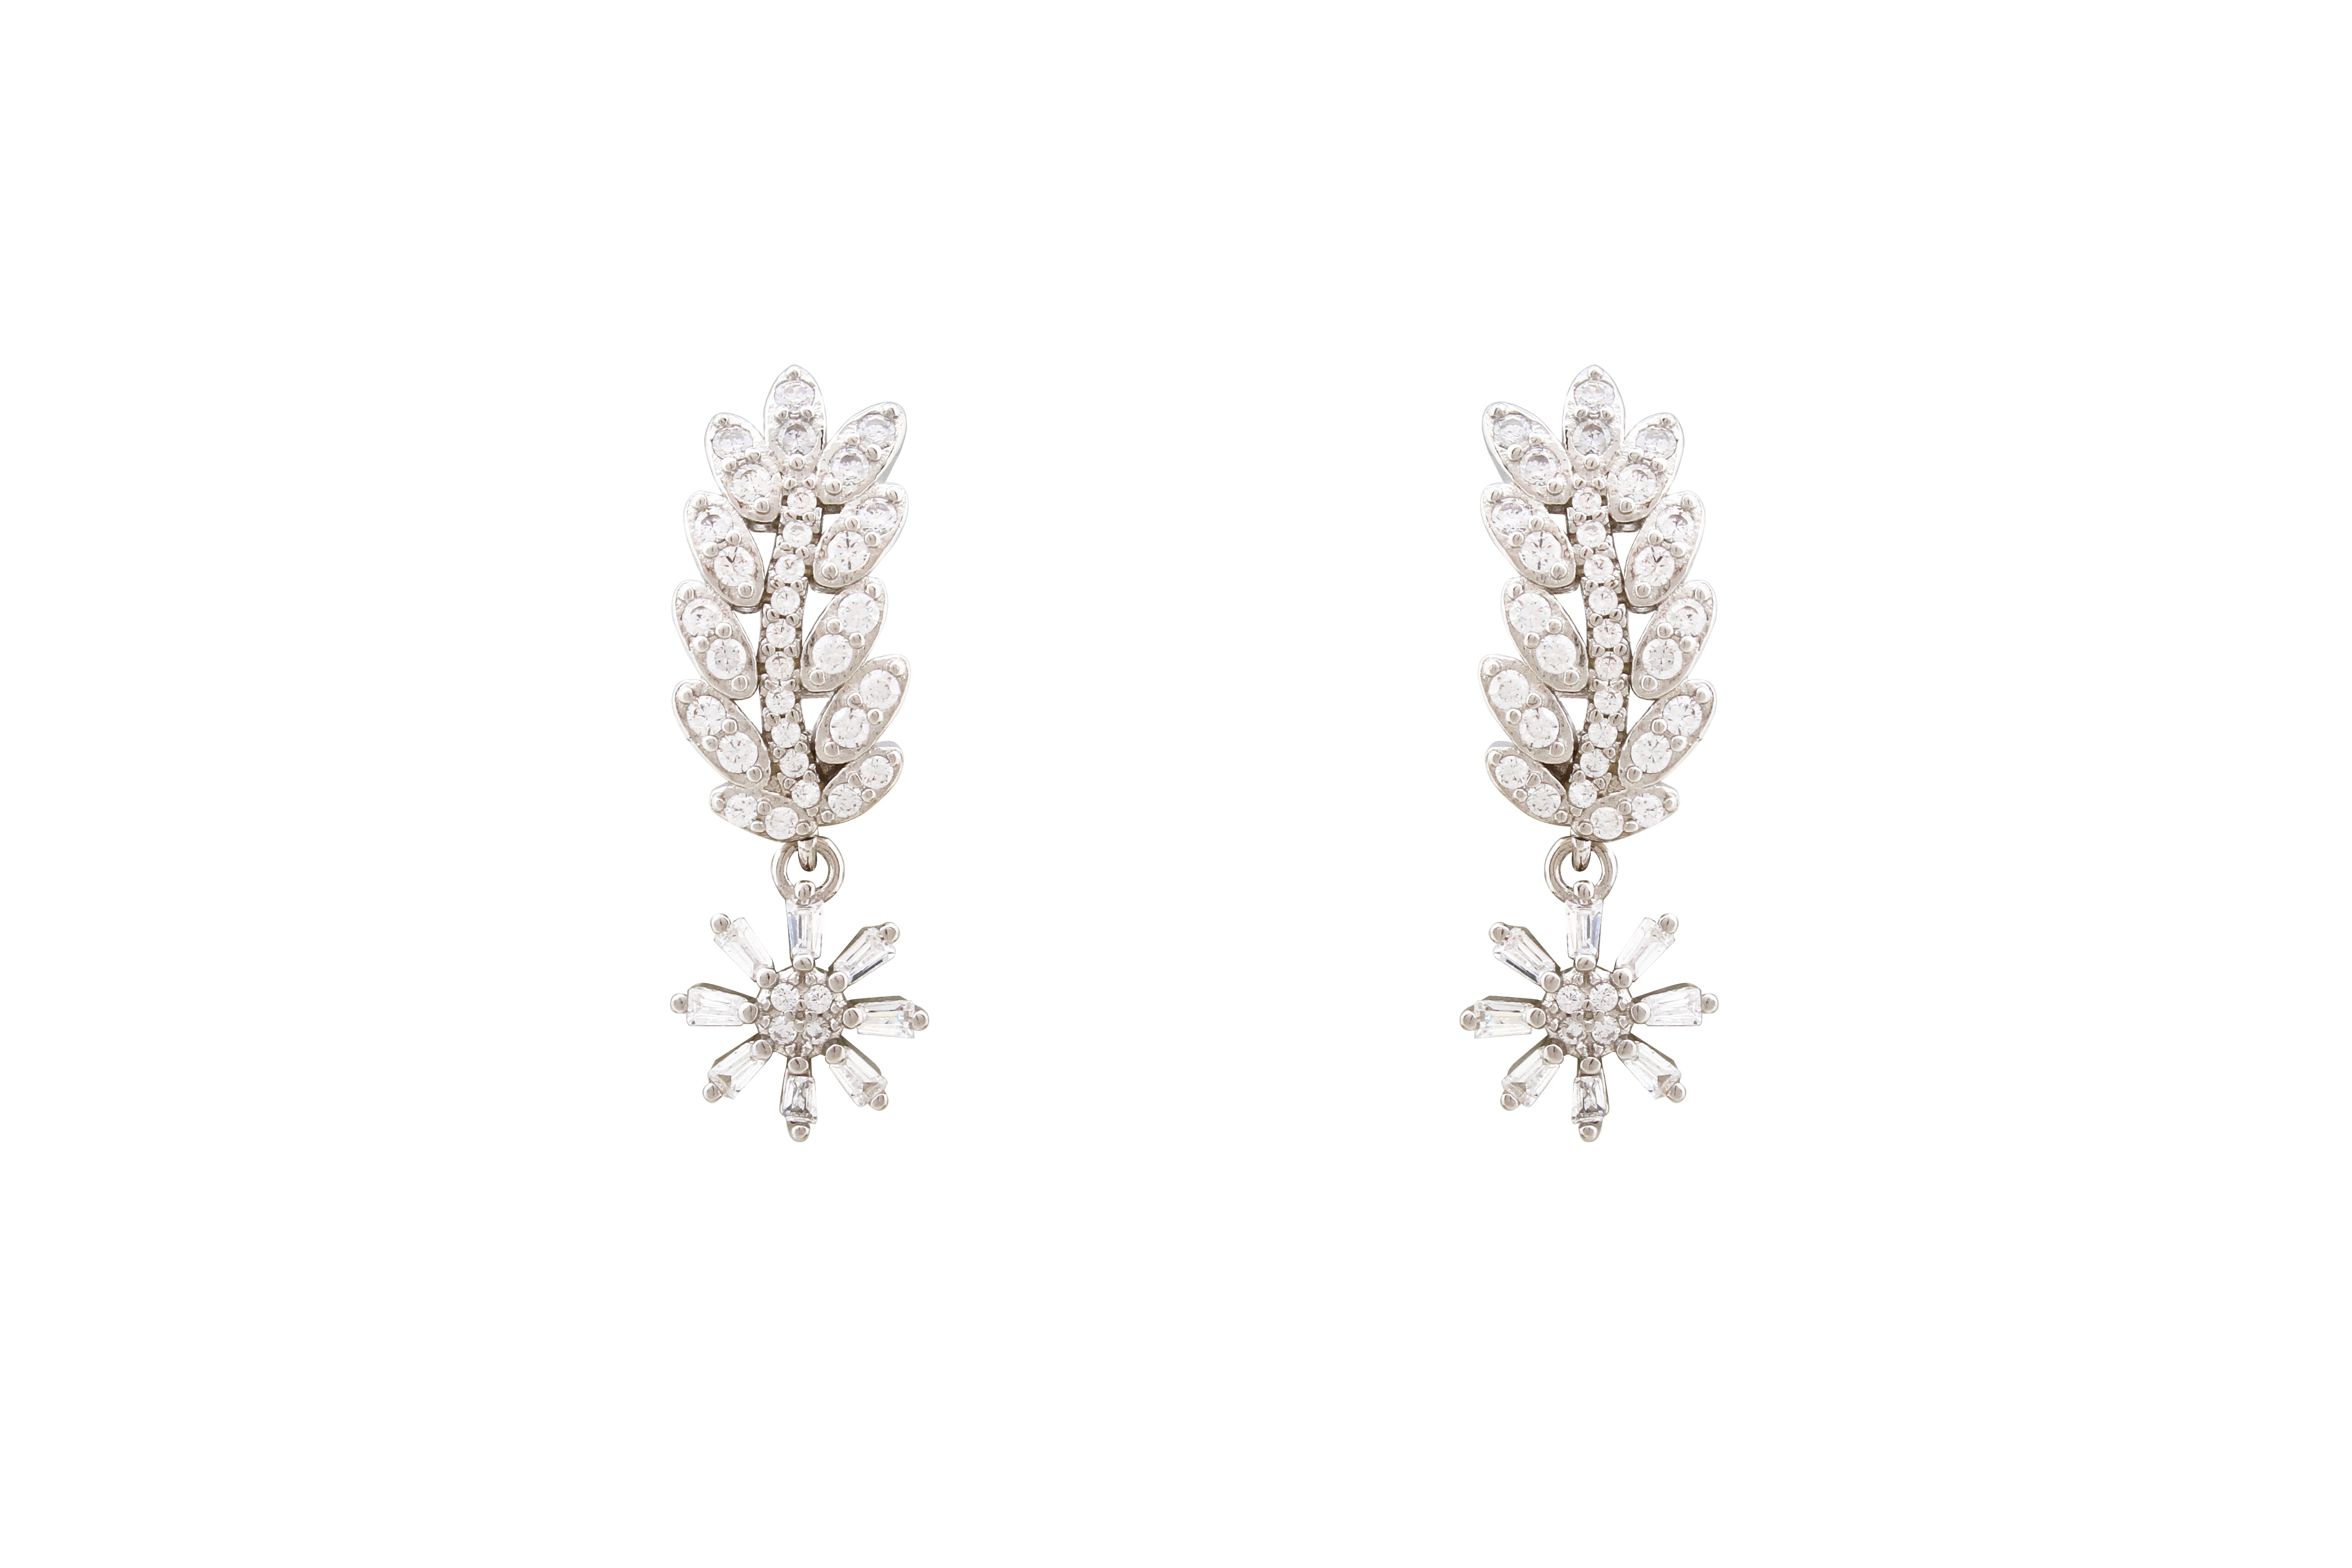 Asfour Crystal Drop Earrings With Decorative Leaf Design In 925 Sterling Silver ER0450